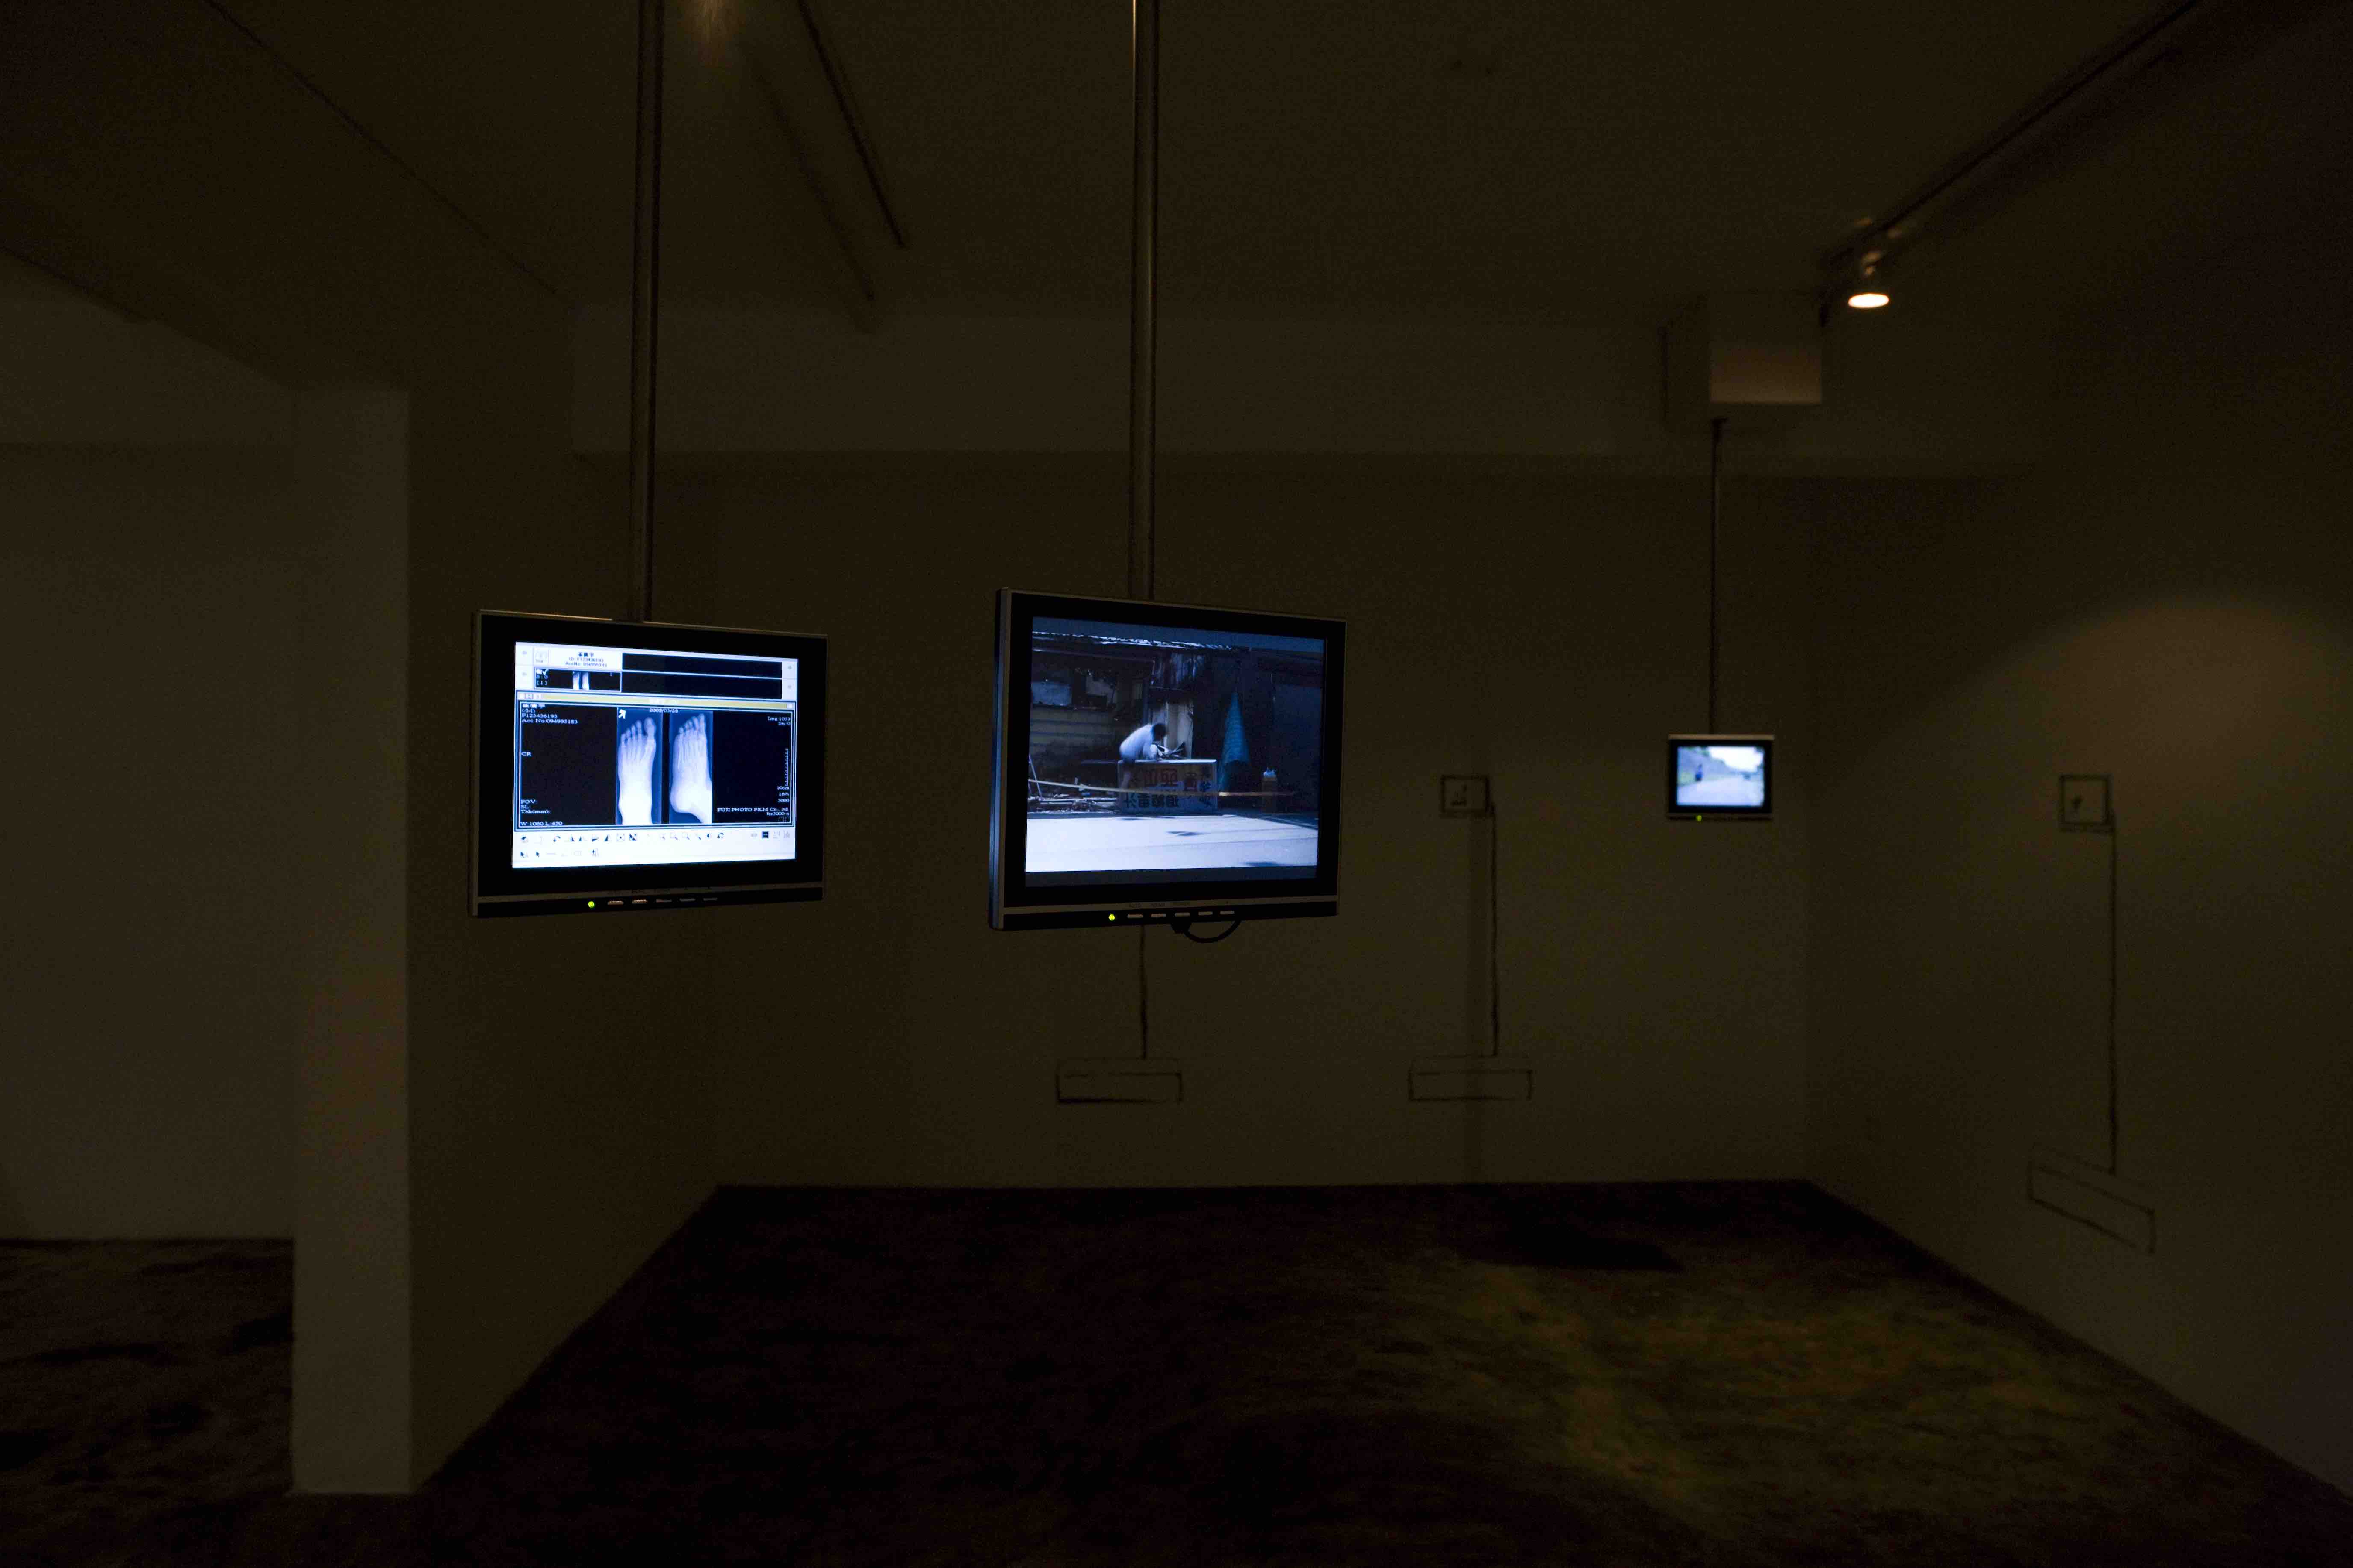 Absence – 1995 and 2005 Documenta, Solo Exhibition by K. Y. Tsui